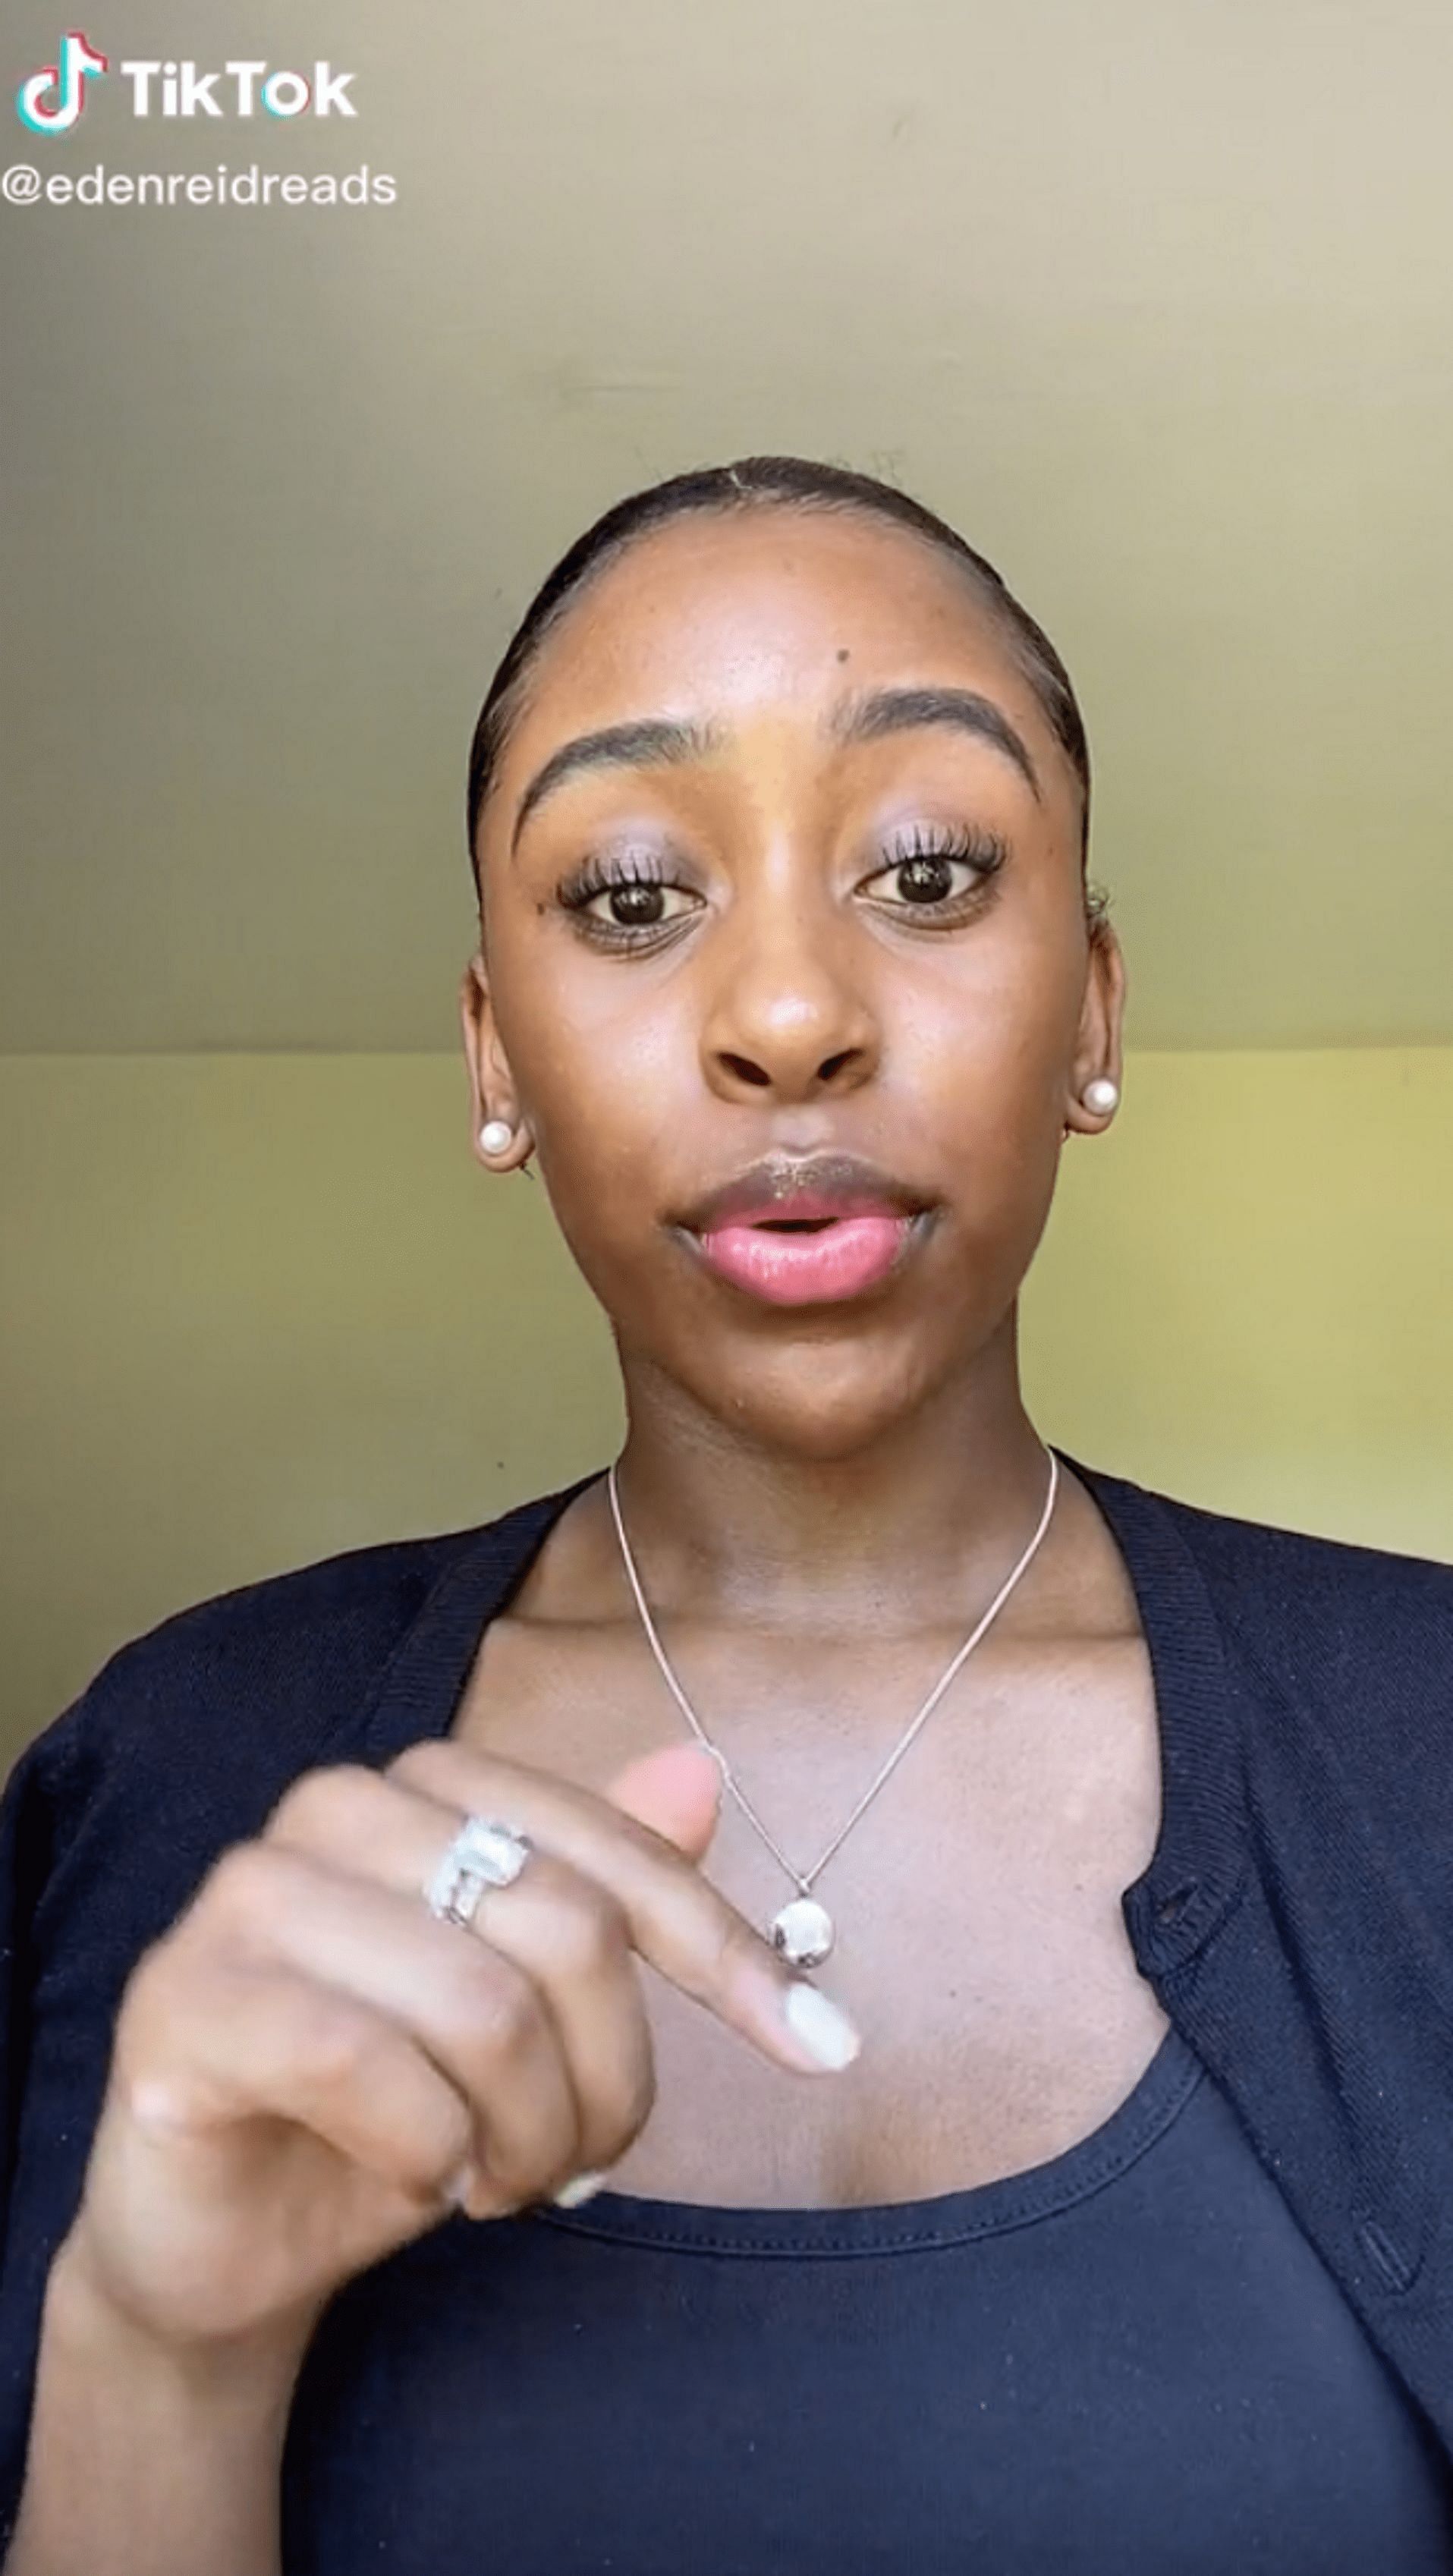 Eden Reid shares her favourite picks, and reads aloud her favourite parts of the books to her viewers. (Image via TikTok/edenreidreads)